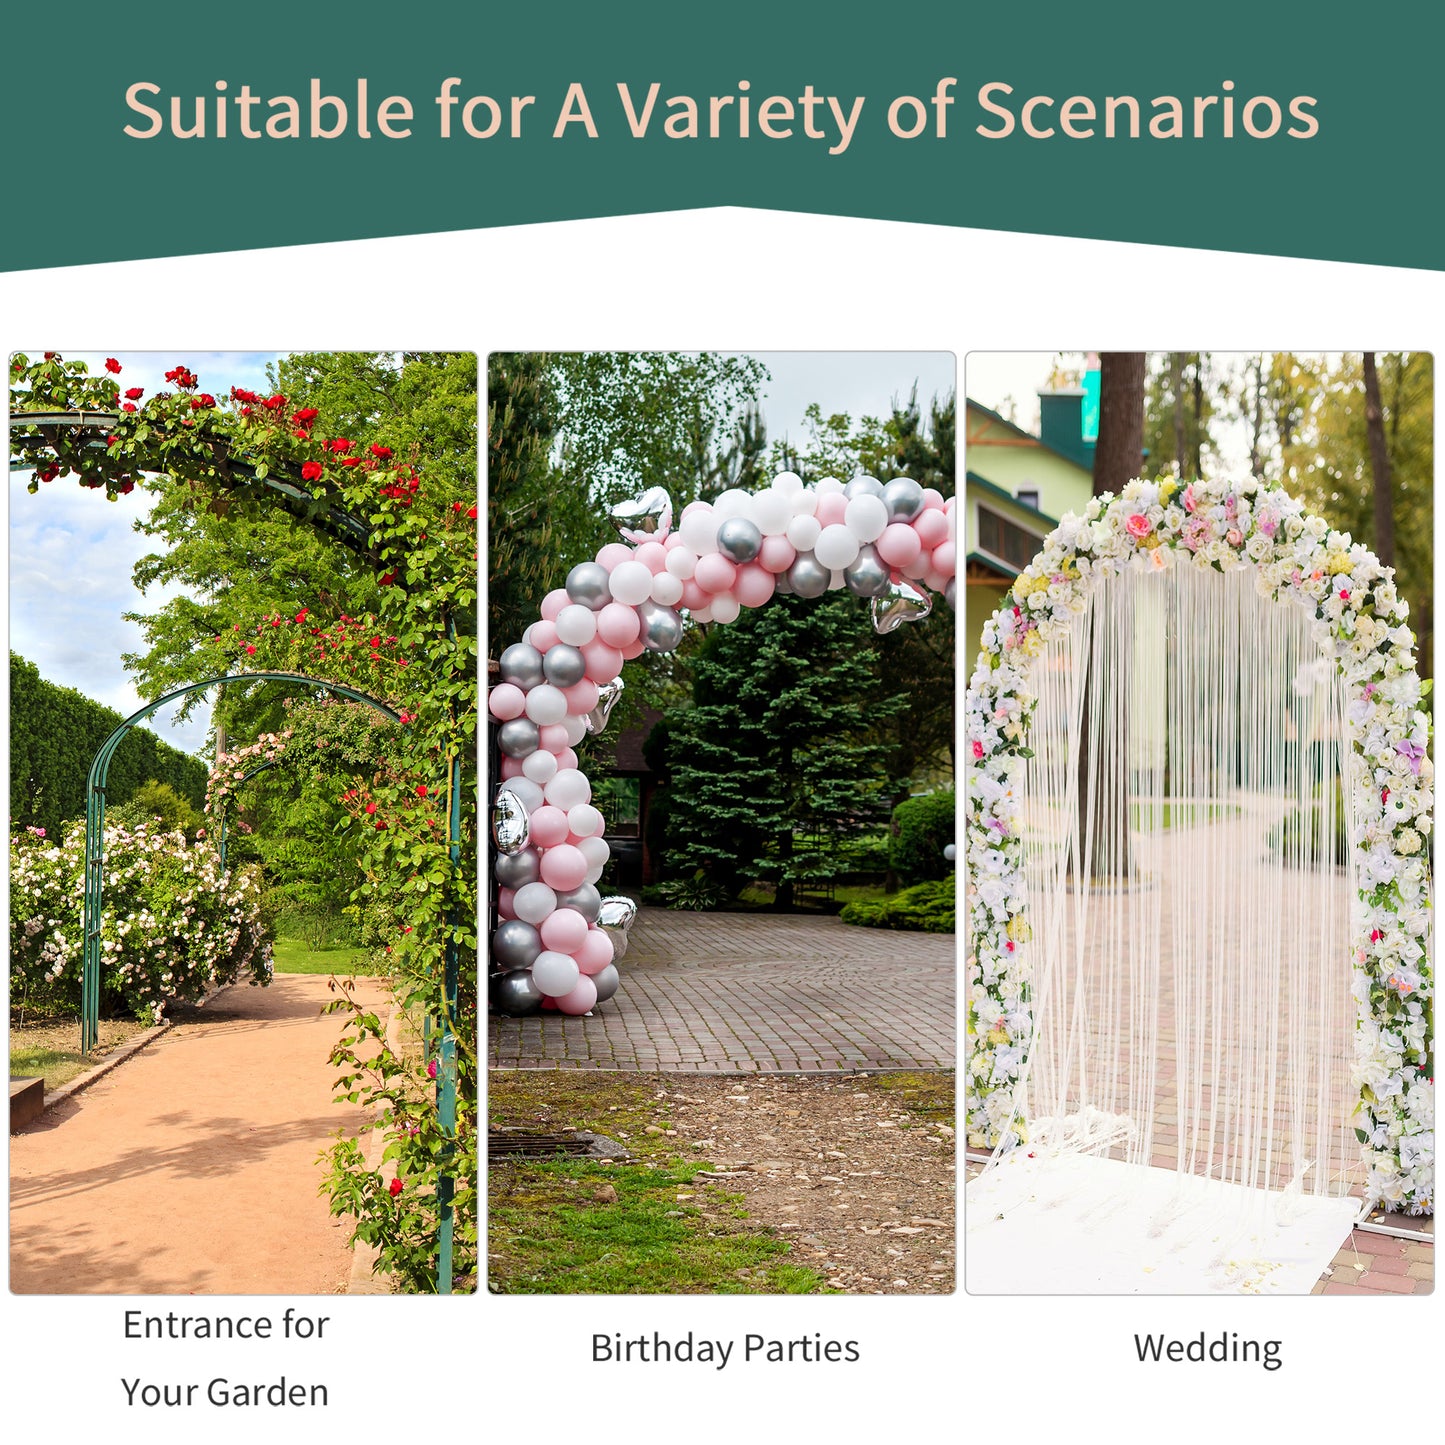 Outsunny Metal Decorative Garden Rose Arch Arbour Trellis for Climbing Plants Support Archway Wedding Gate 120L x 30W x 226H (cm)